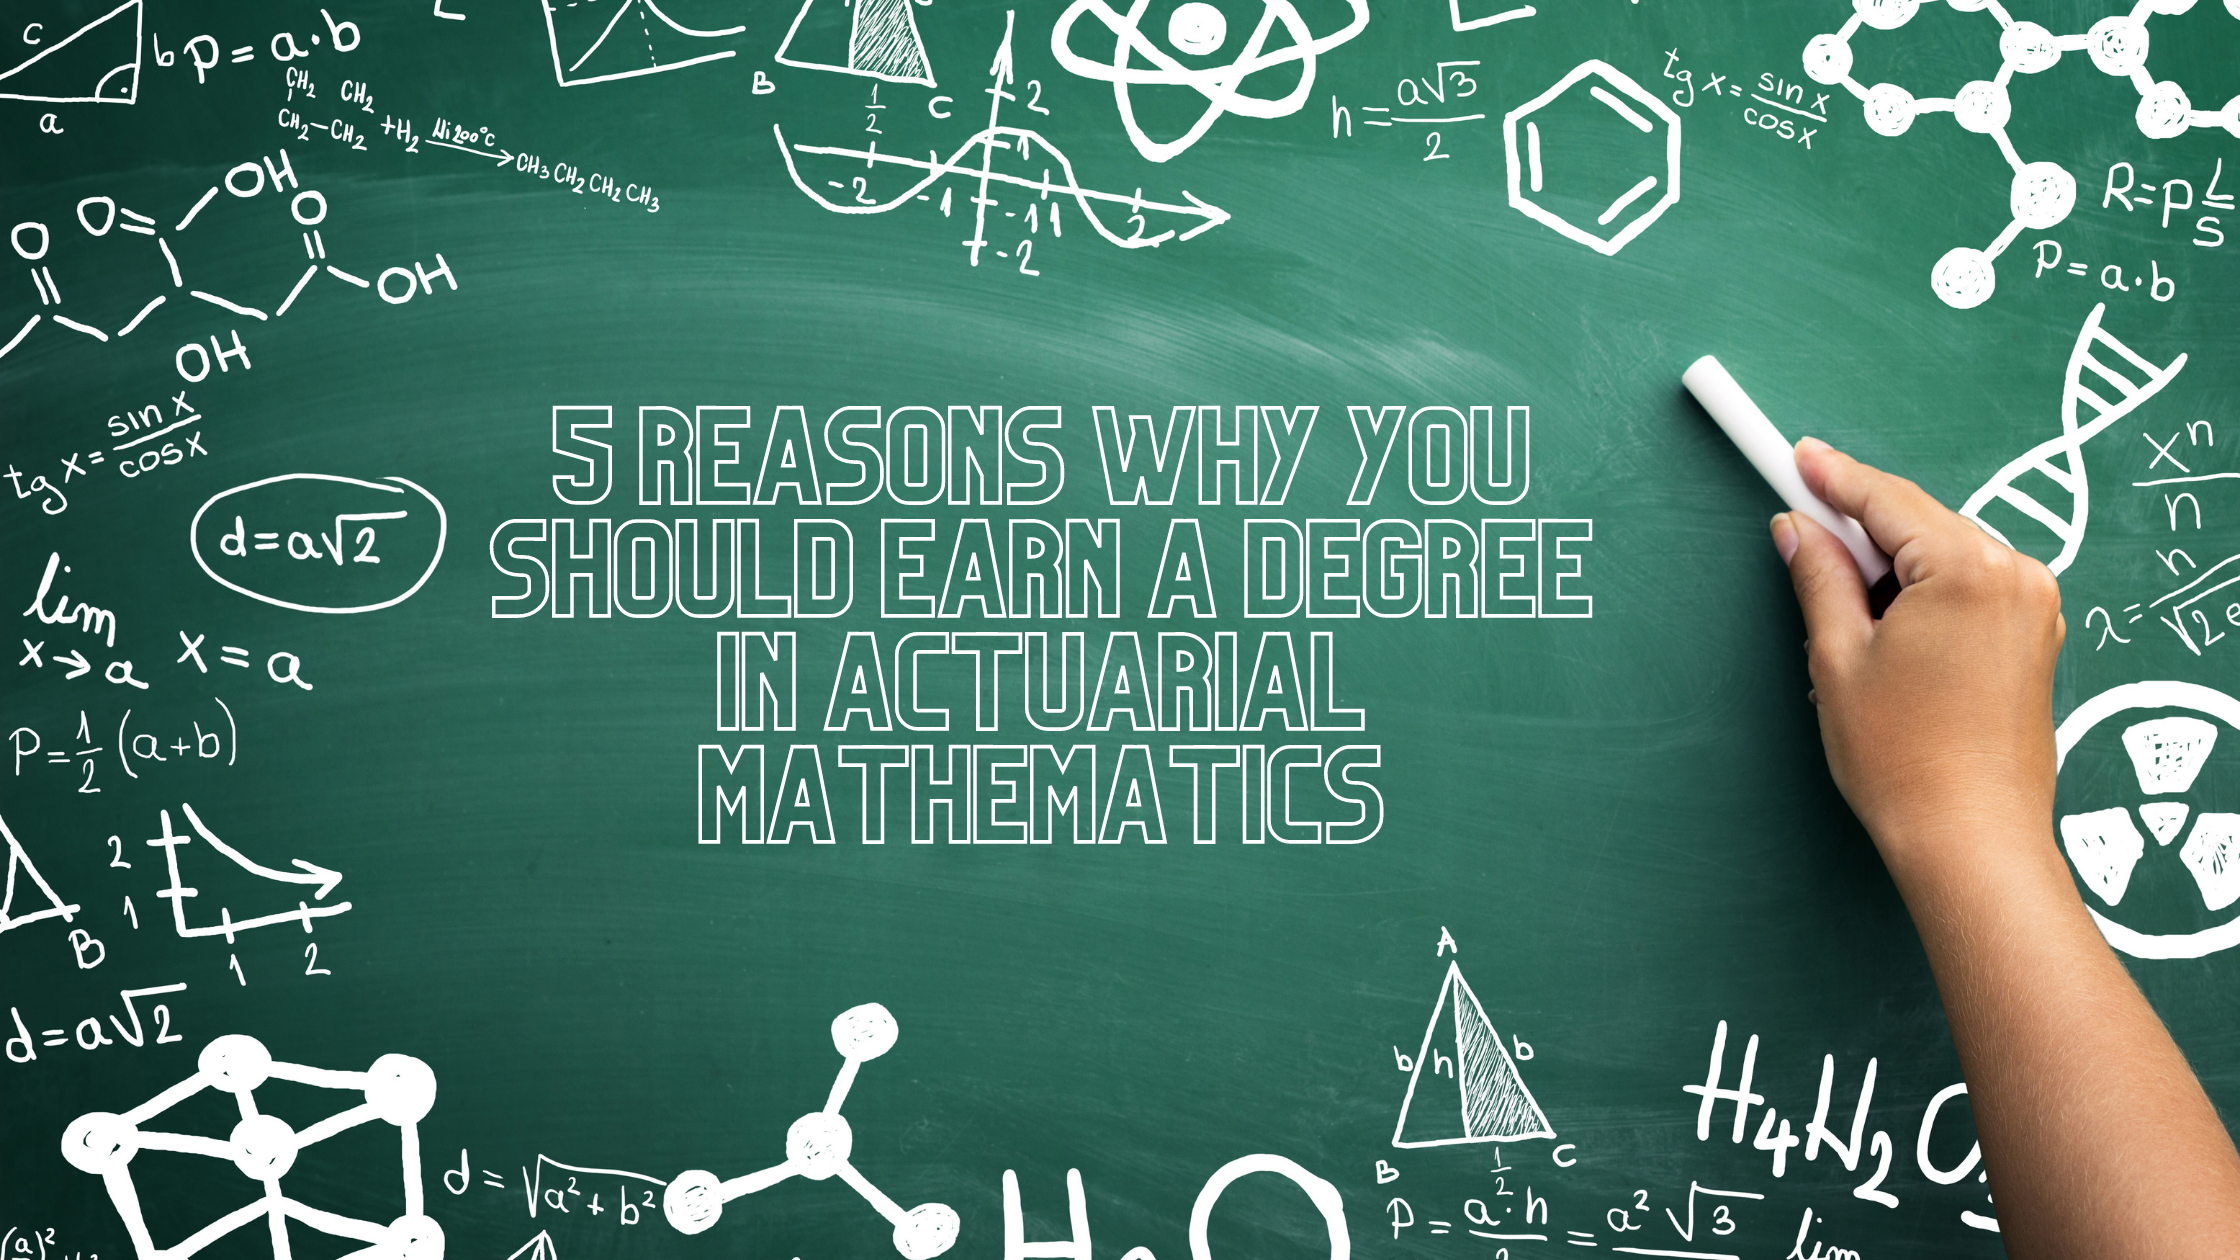 Image of 5 Reasons You Should Consider Earning a Degree in Actuarial Mathematics  